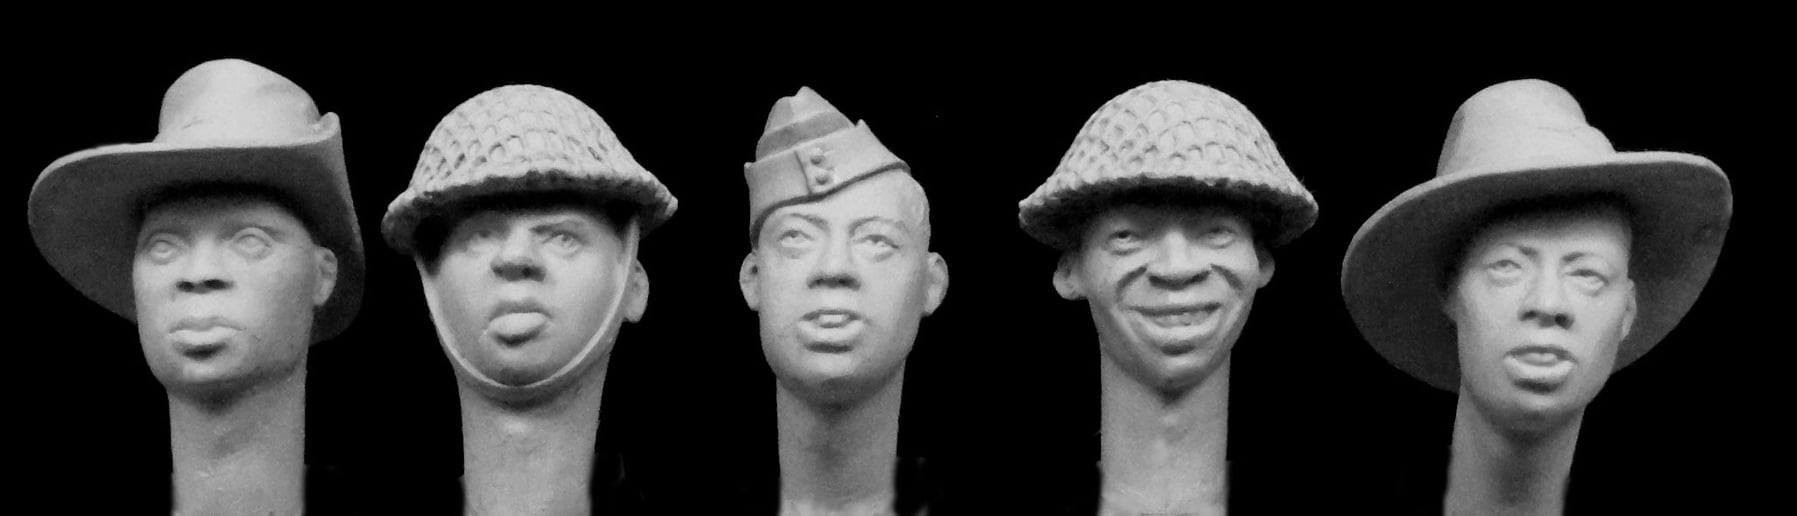 HAH06 African soldiers in British service, WW2